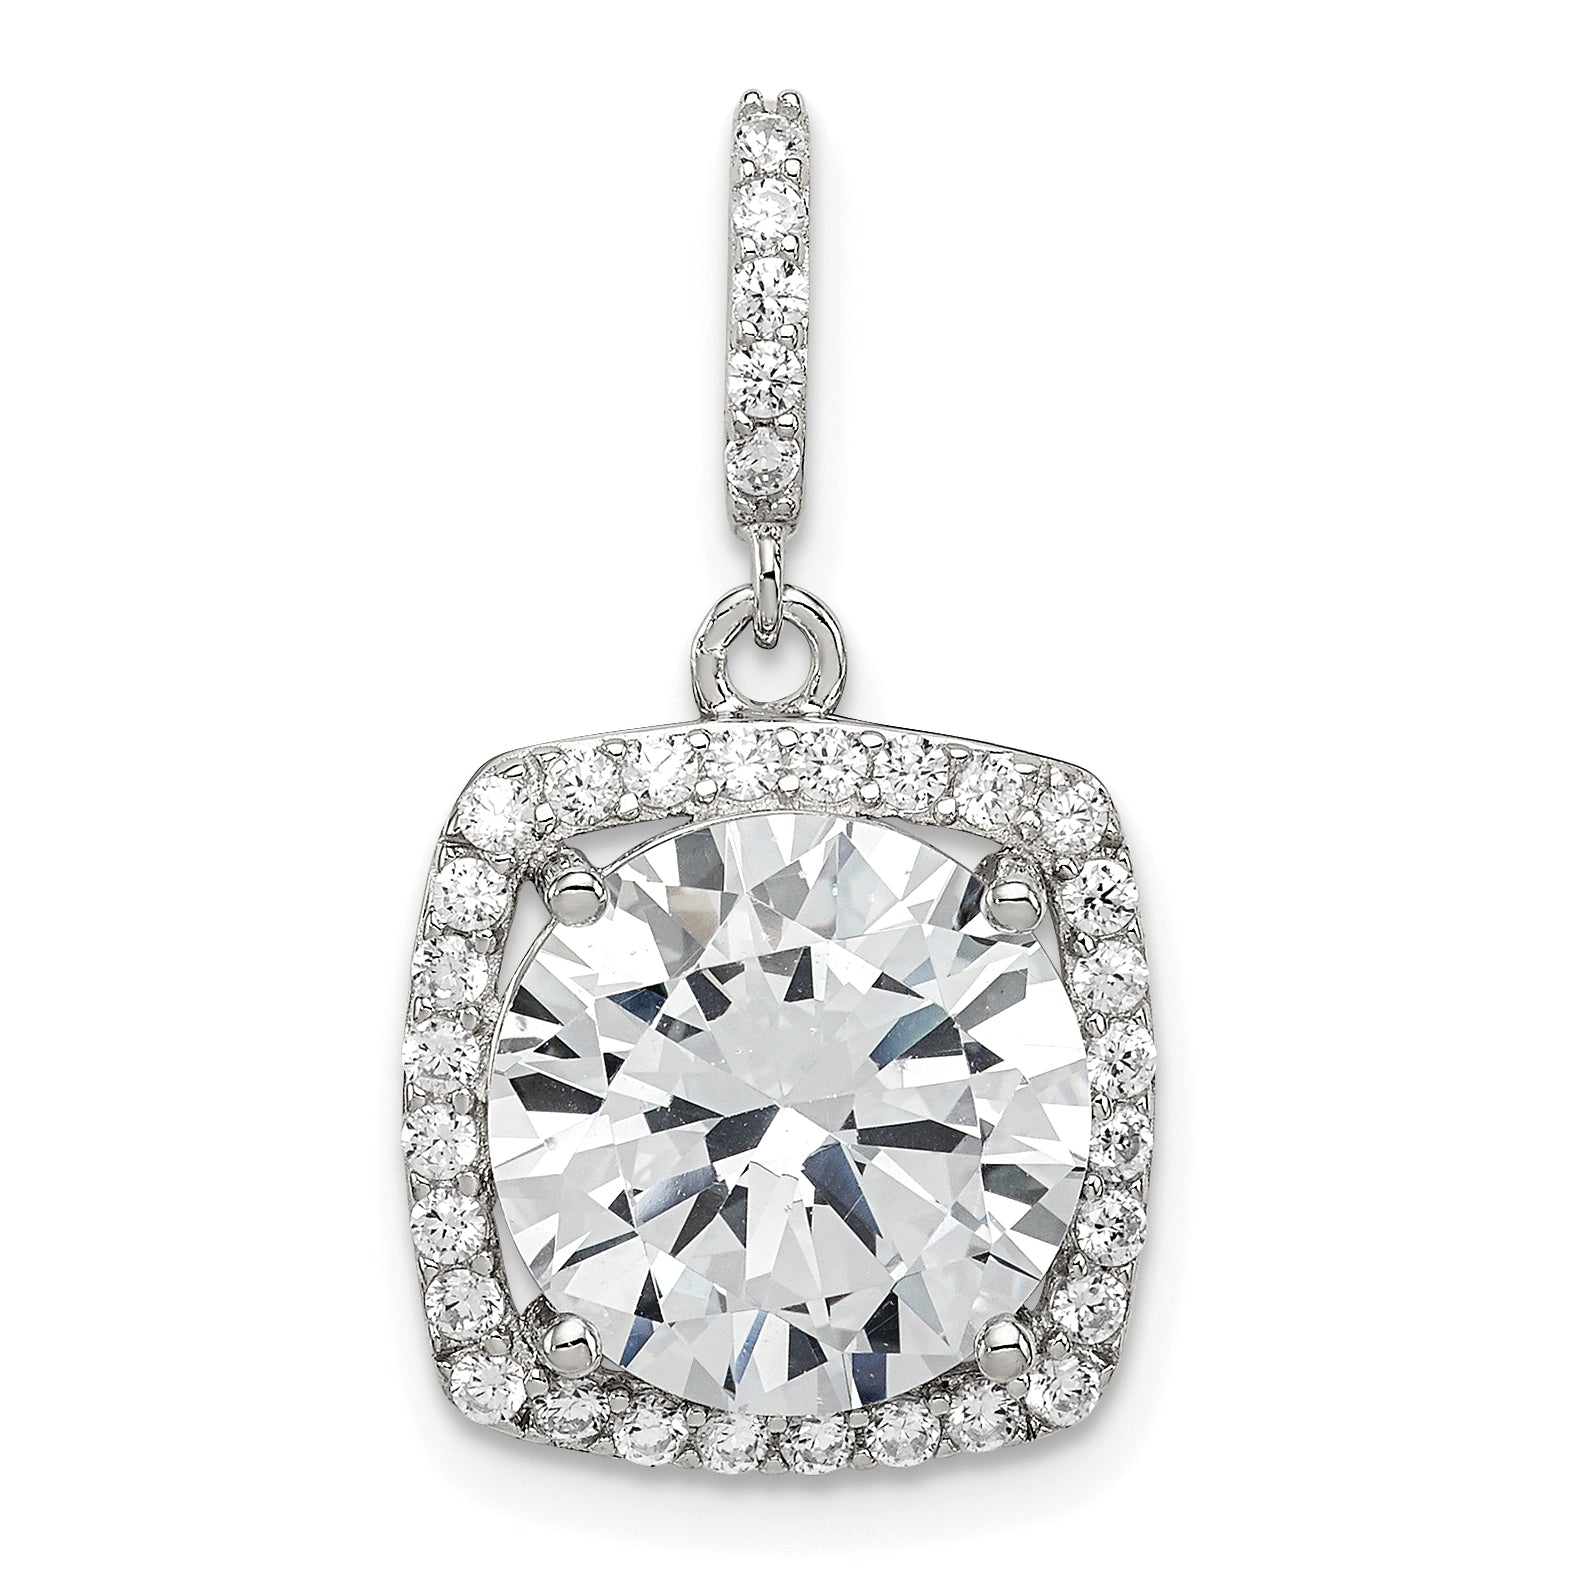 Sterling Silver Rhodium-plated Polished CZ Pendant